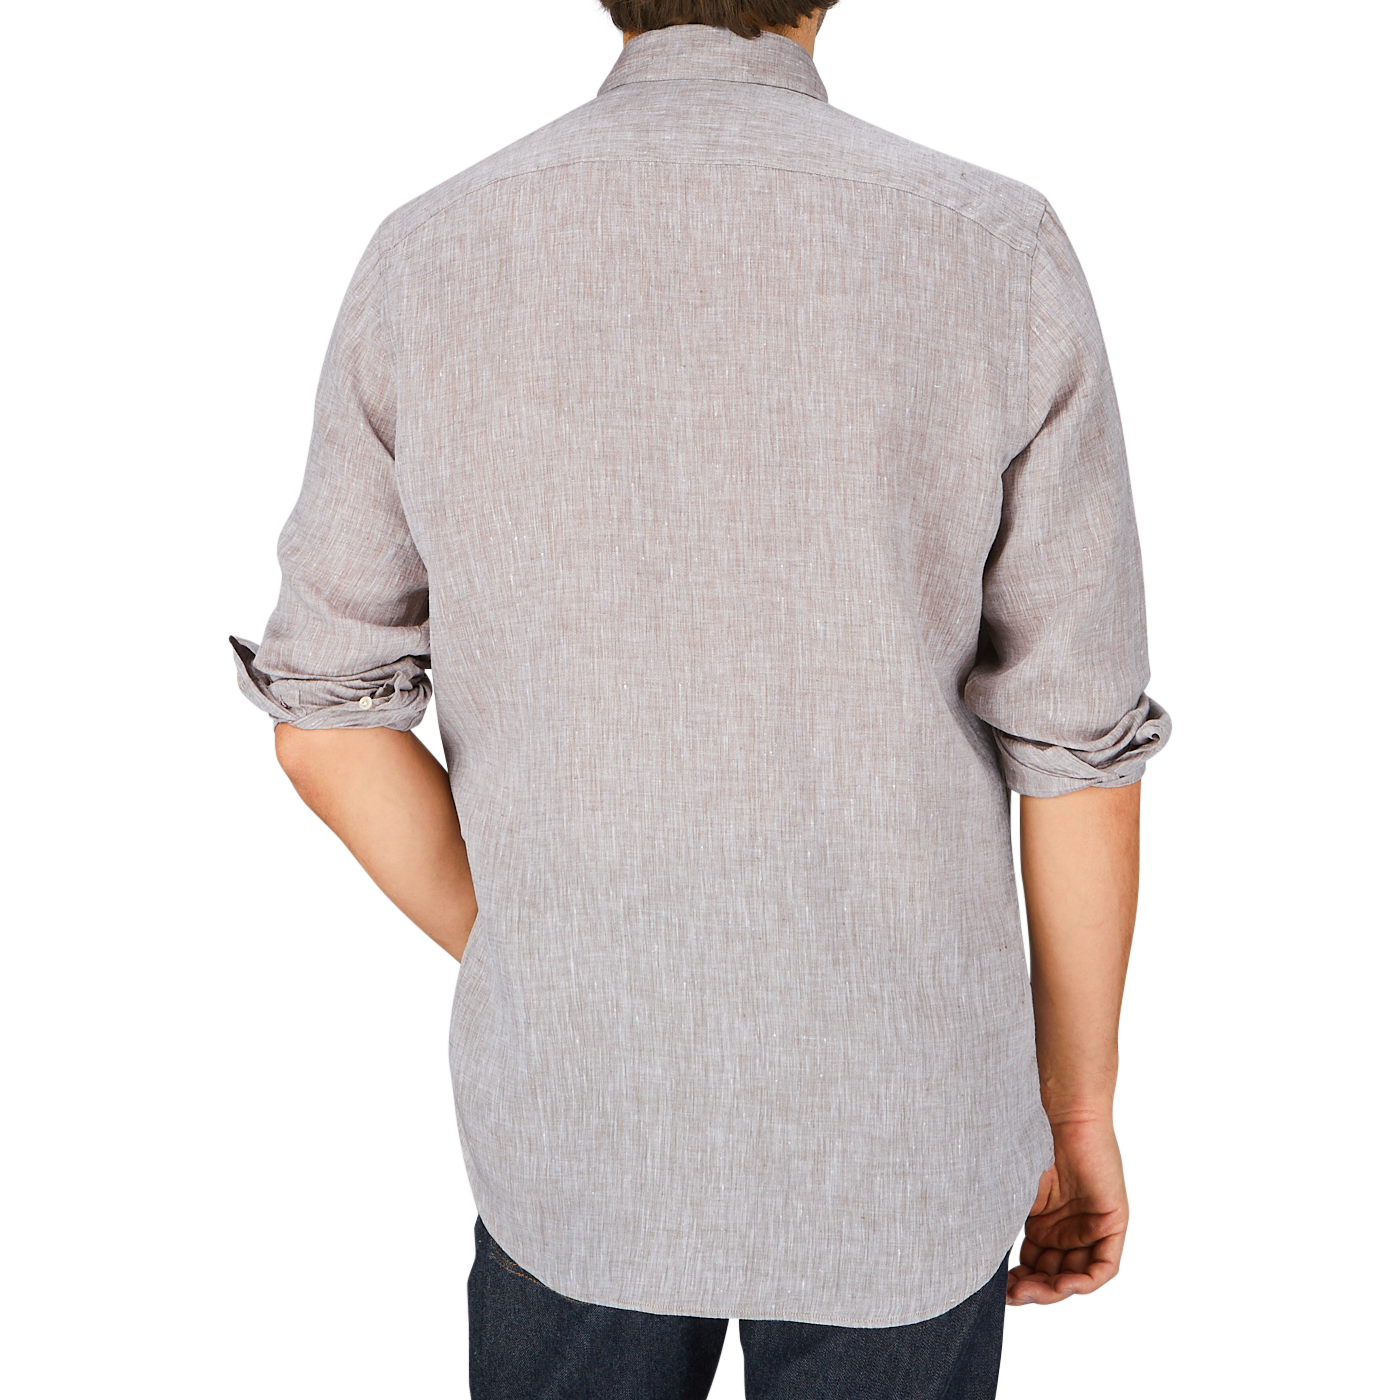 Man wearing a Glanshirt brown melange linen regular fit shirt, rolled-up sleeve and jeans, viewed from behind.